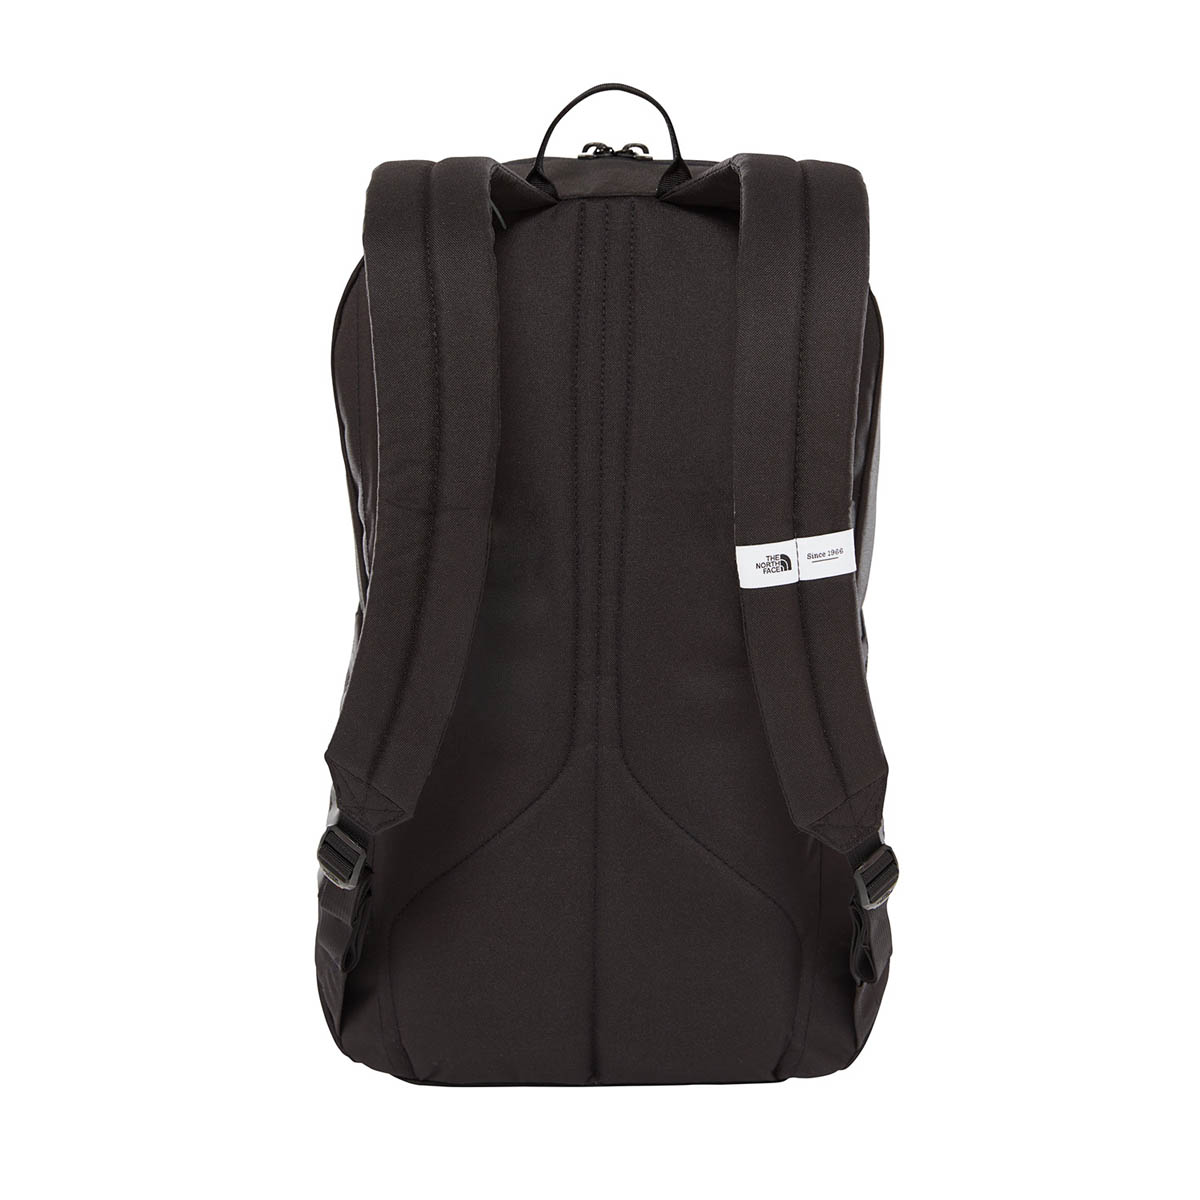 THE NORTH FACE - RODEY BACKPACK 27 L